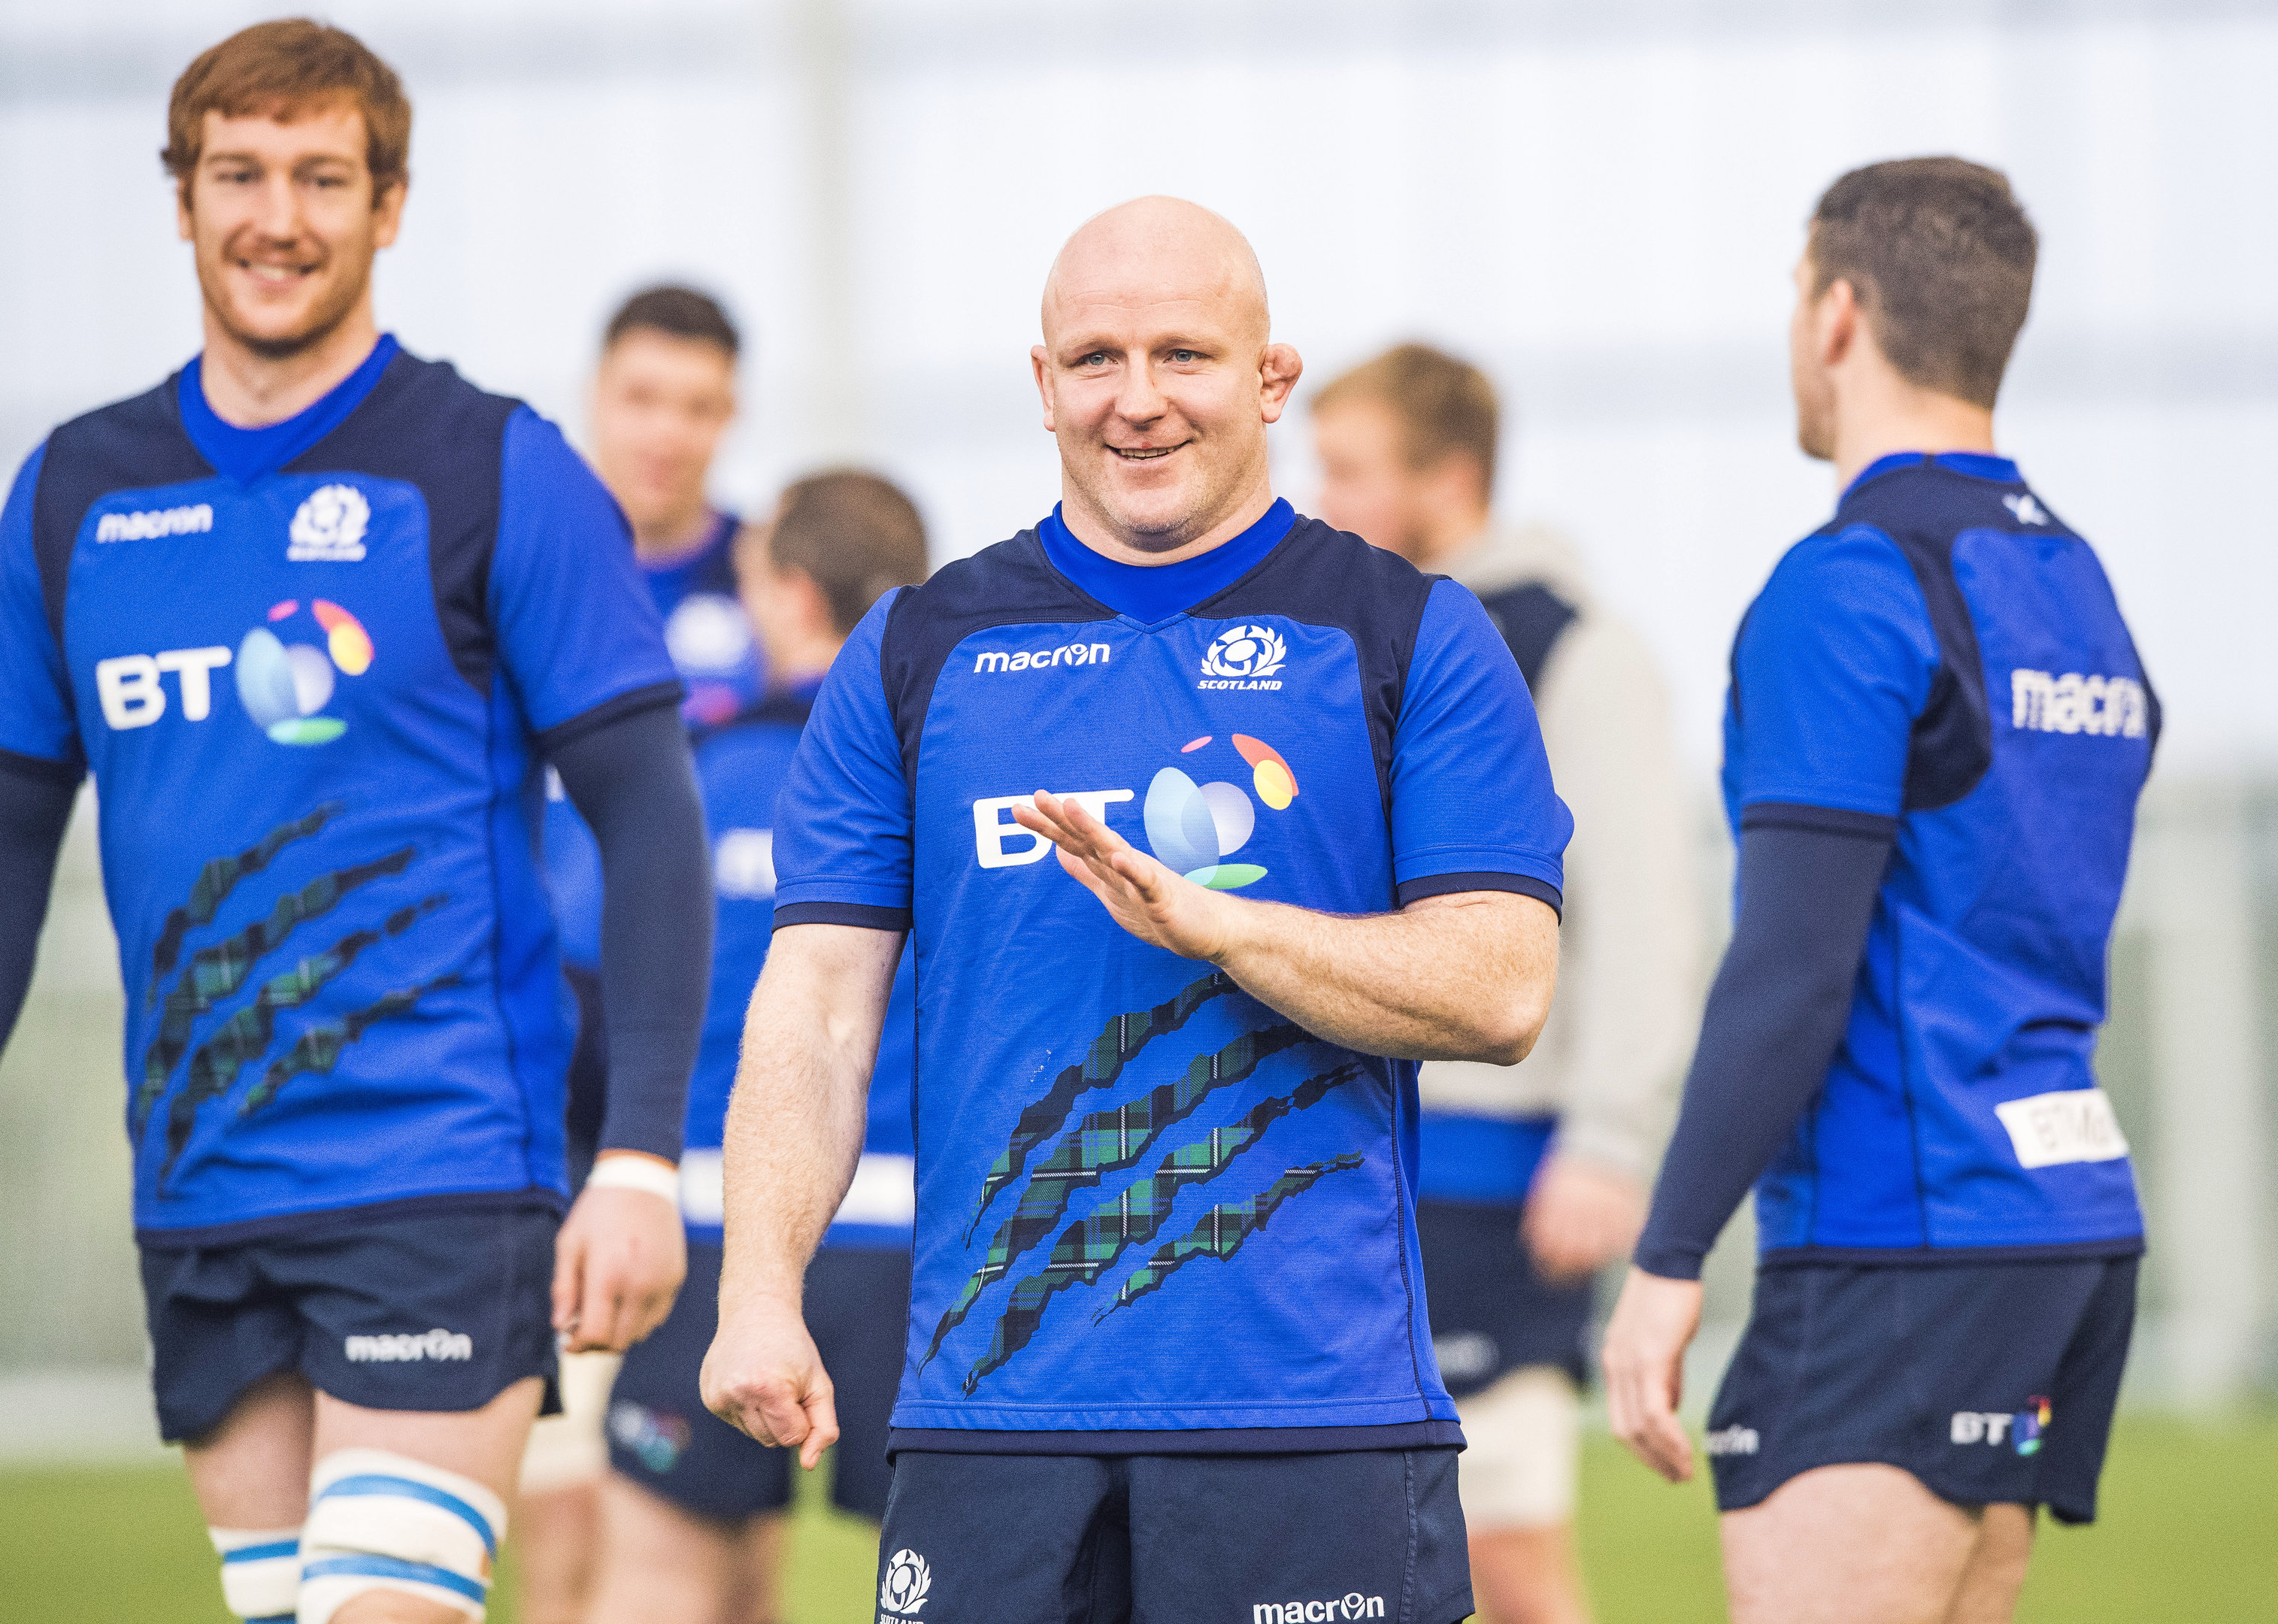 Former Scotland hooker Scott Lawson will be the new Director of Rugby at St Andrews University.